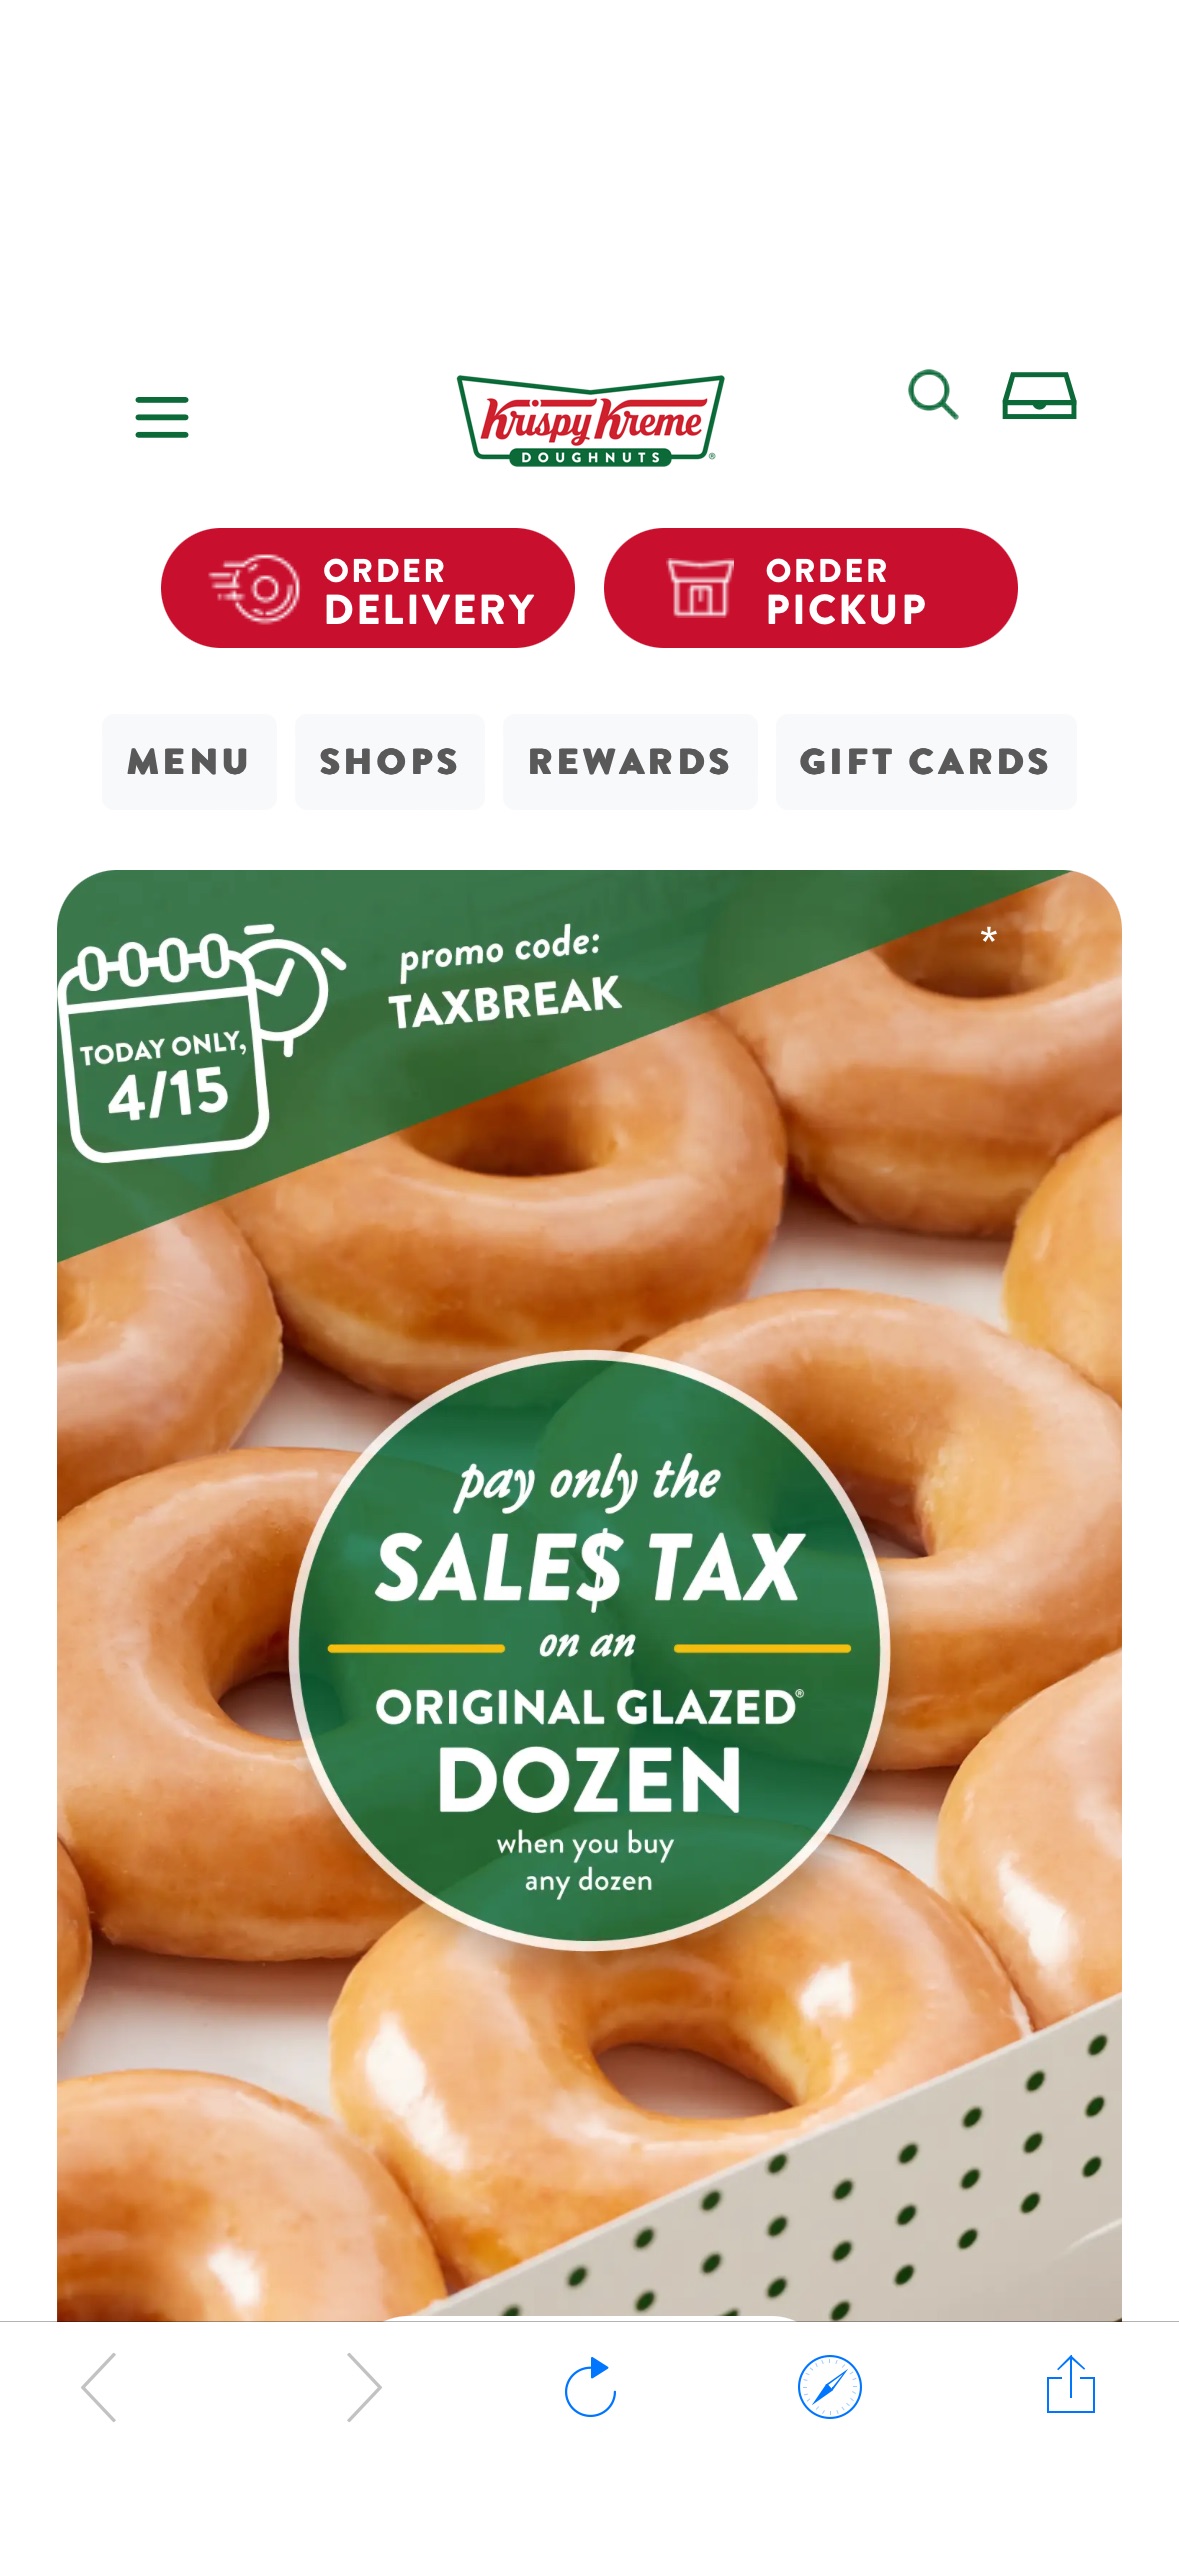 Krispy Kreme – On Tax Day, Apr. 15: purchase an Original Glazed or Assorted dozen in shop and receive a second Original Glazed dozen for just the price of sales tax in your state. At participating Kri